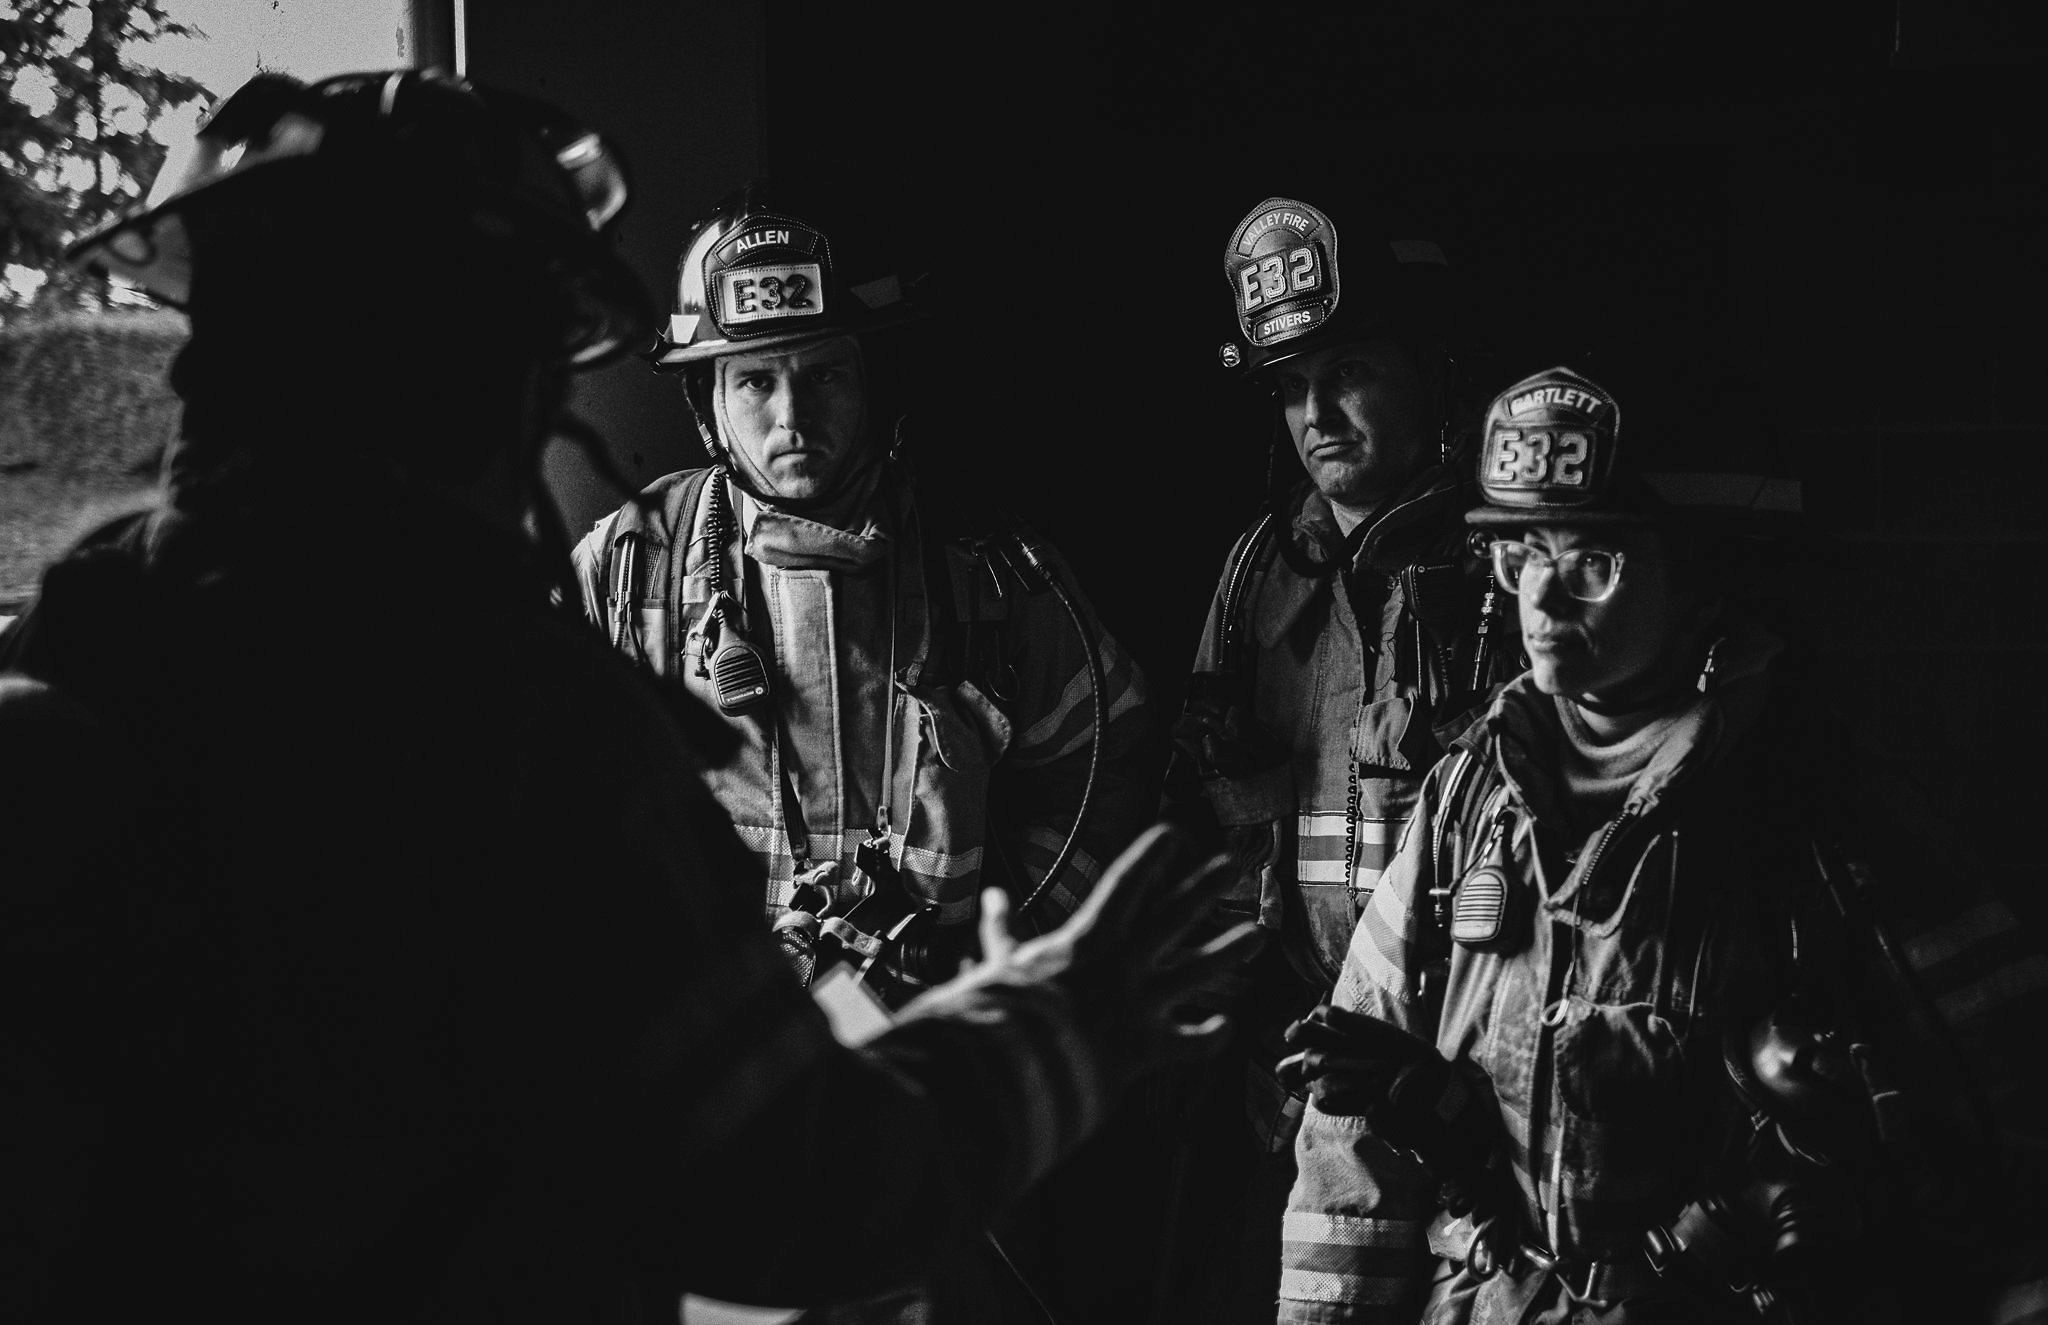 Valley Regional Fire Authority firefighters gathered in a dark room discussing their service.